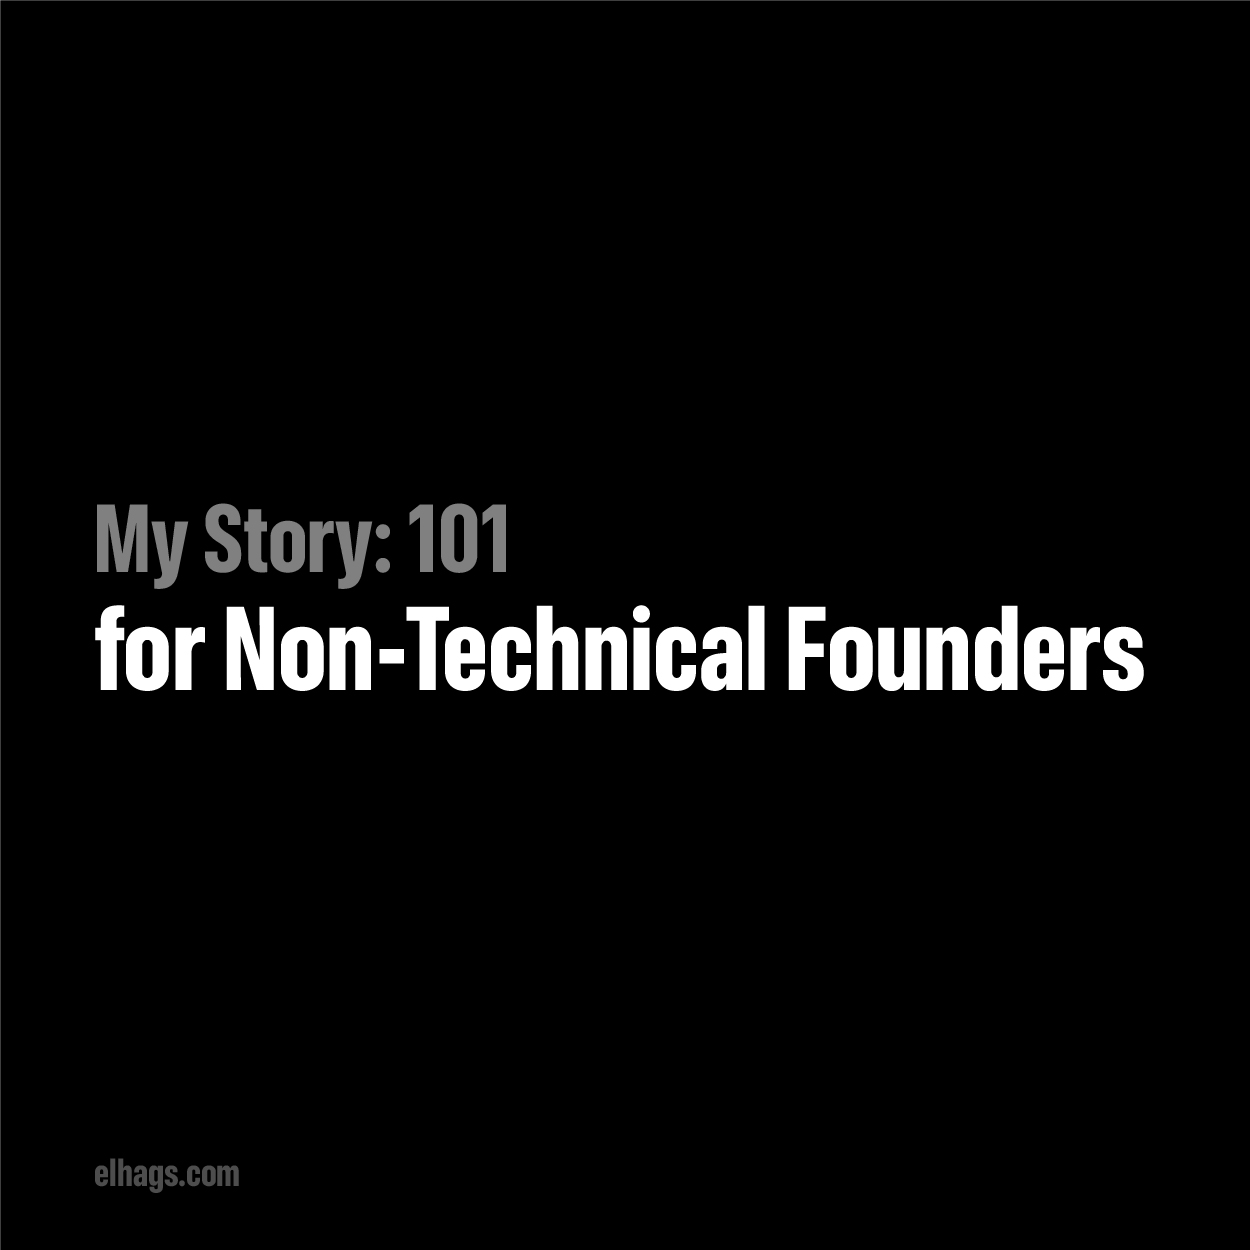 My Story: 101 - My journey from Security Guard to Fullstack Engineer